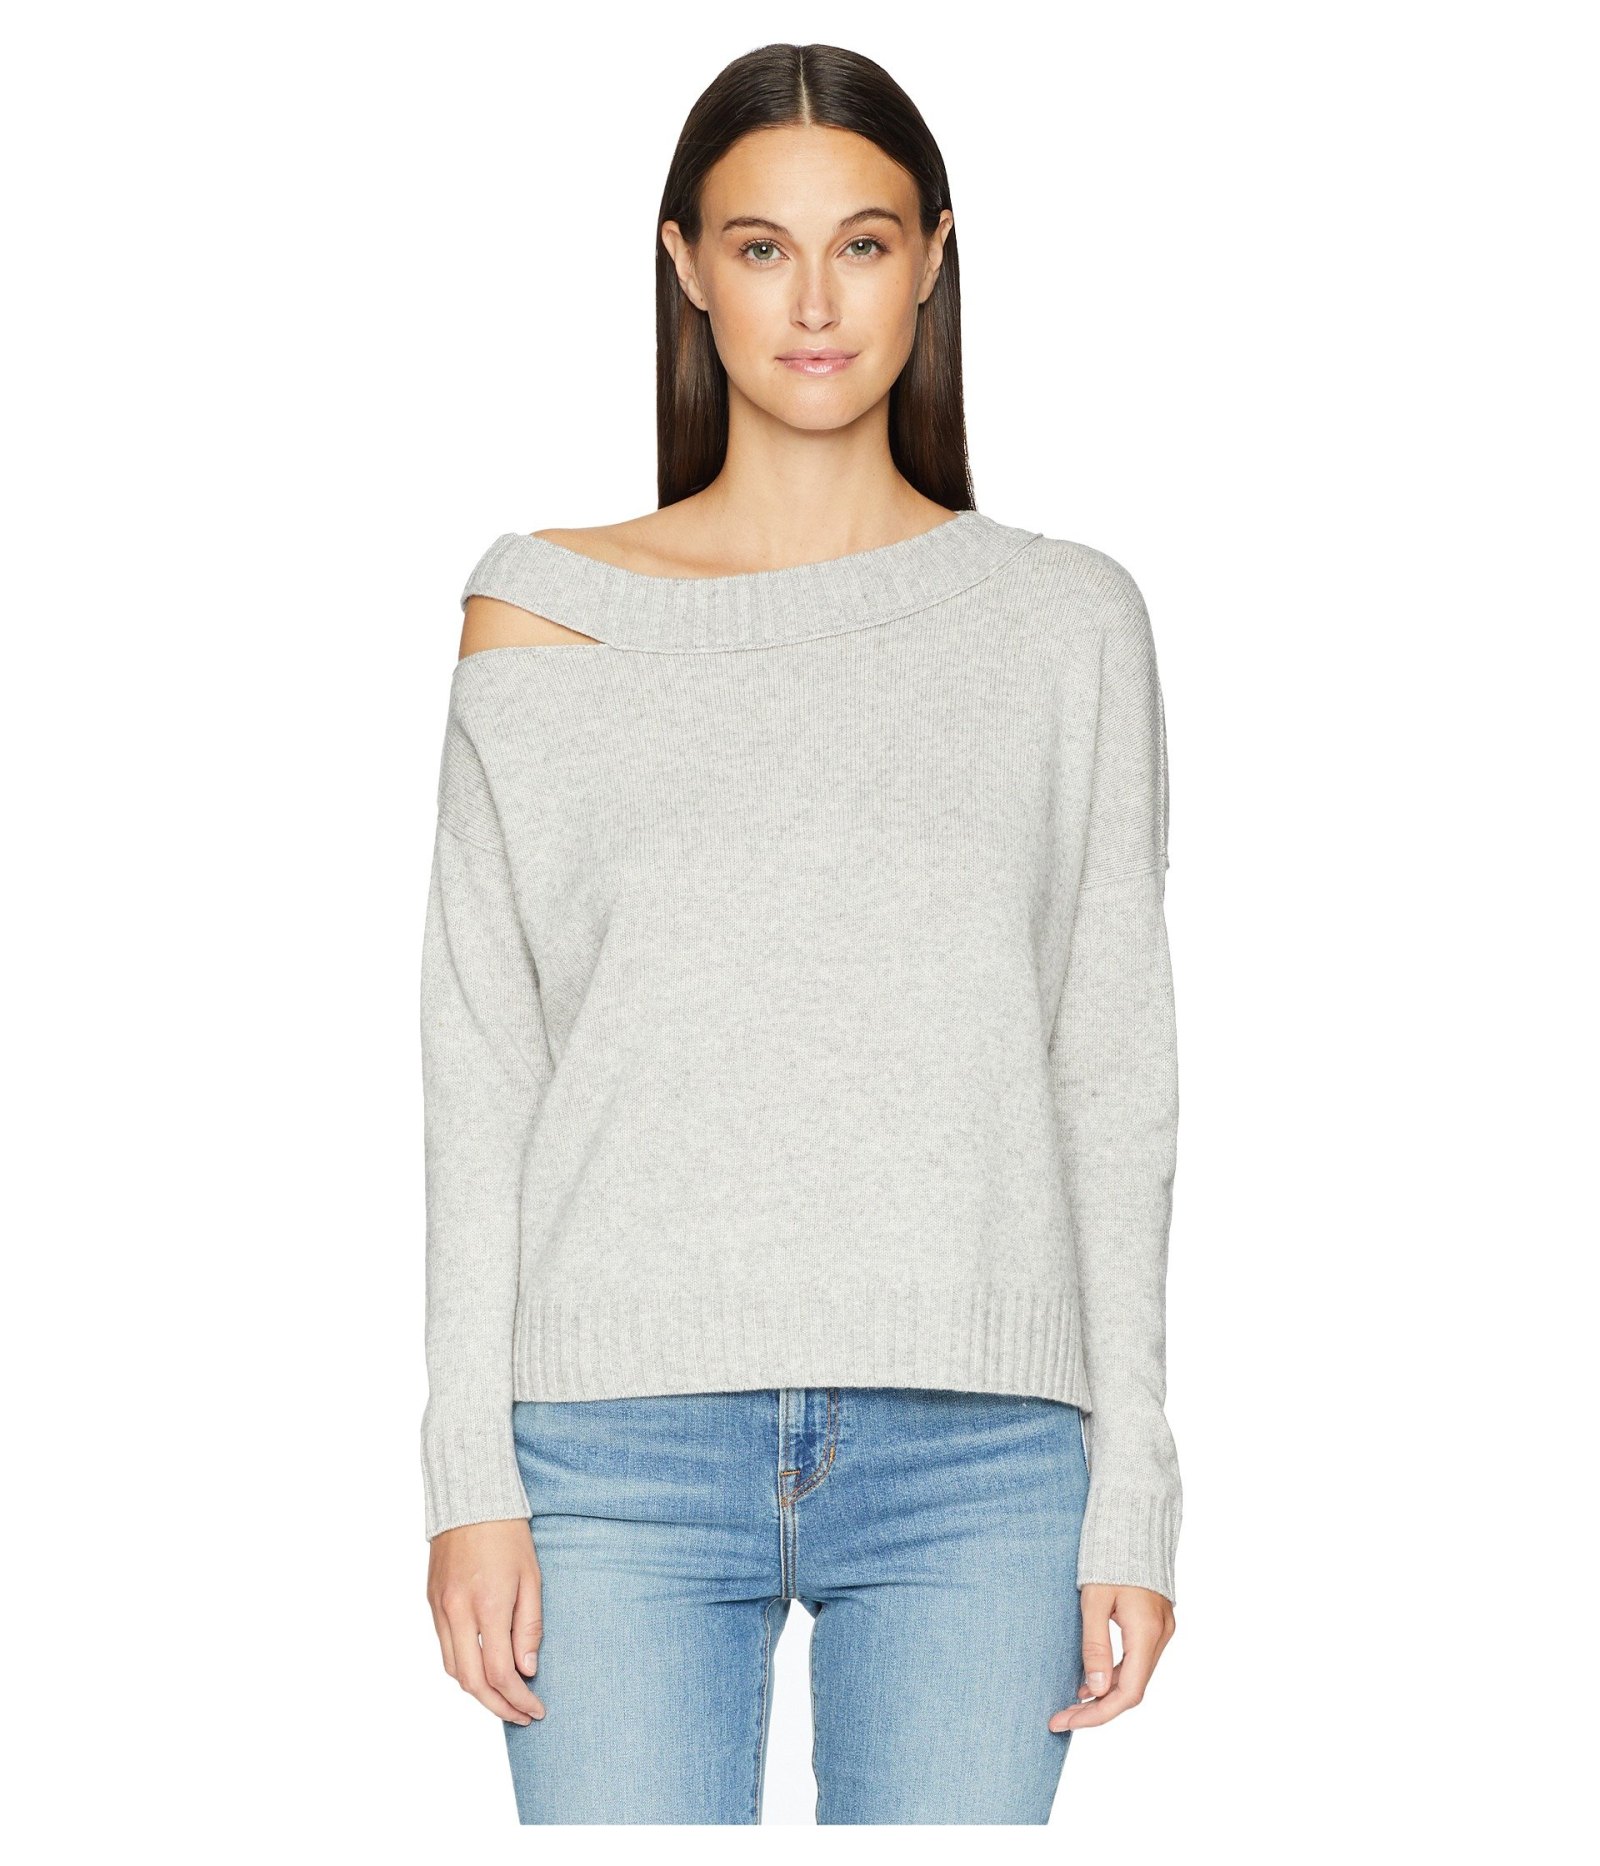 Zappos Sale: This Cashmere Blend Vince Sweater Will Keep Us Cozy | UsWeekly